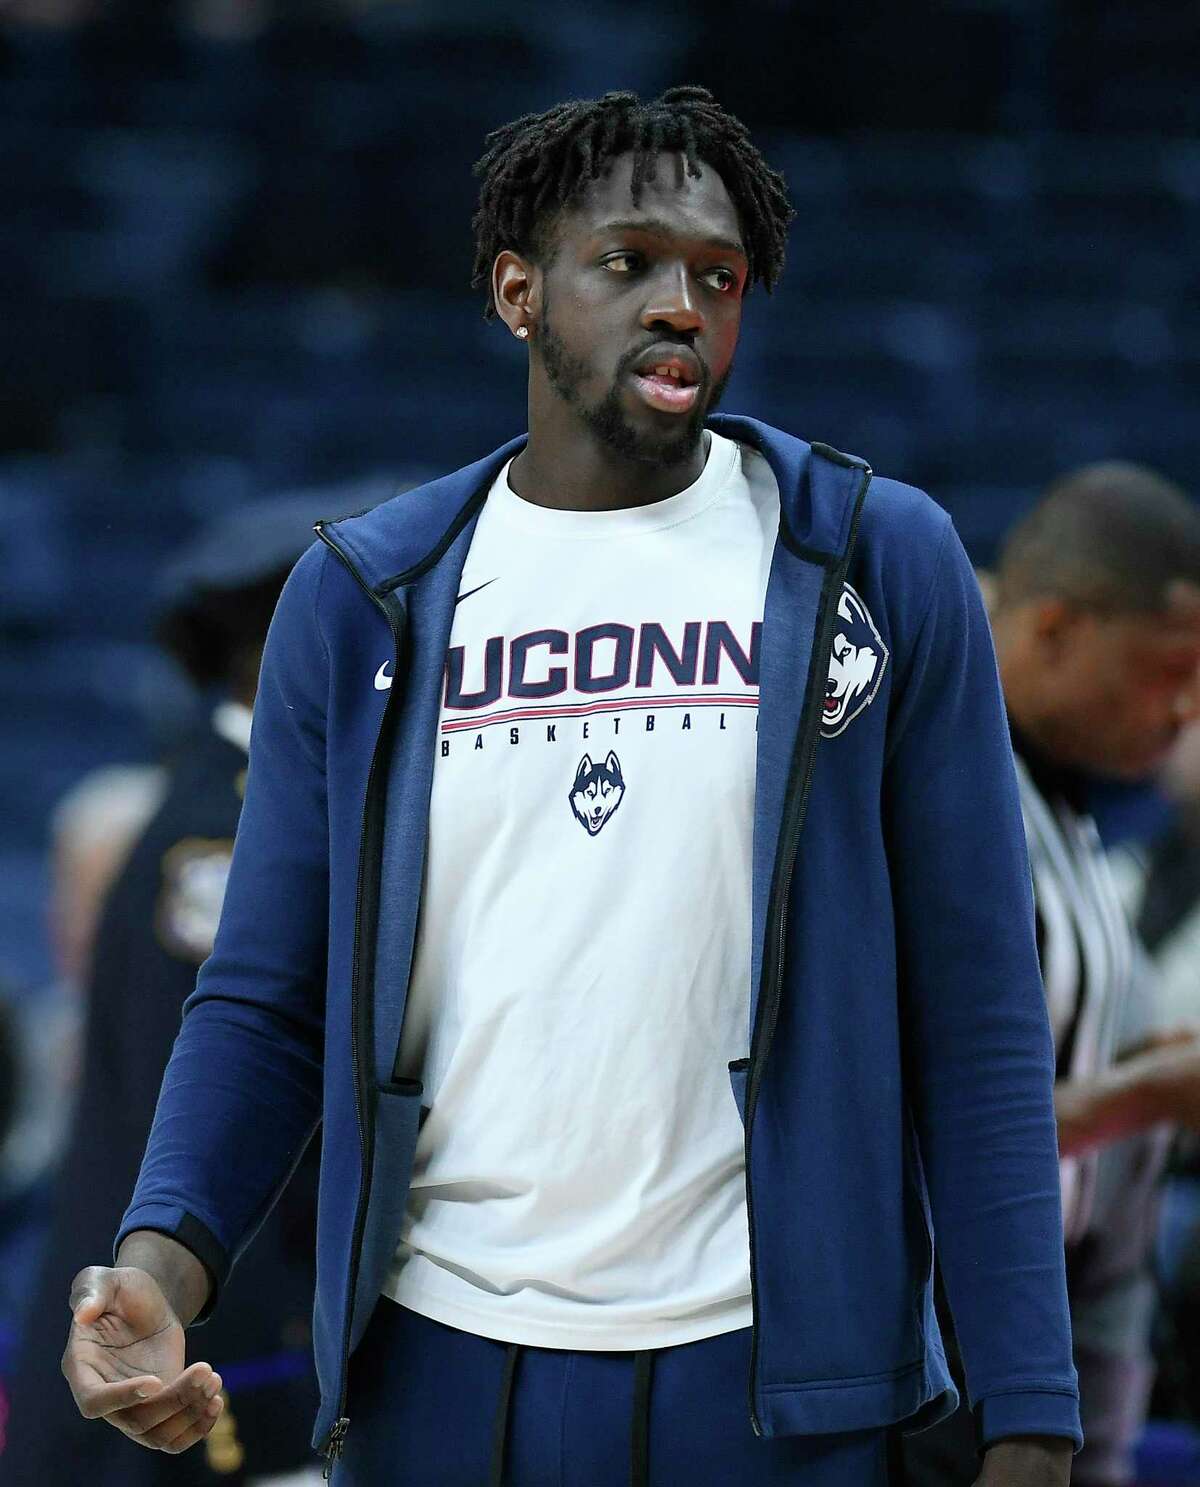 Connecticut's Mamadou Diarra prior to an NCAA college basketball game with SMU, Thursday, Jan. 10, 2019, in Storrs, Conn. (AP Photo/Jessica Hill)